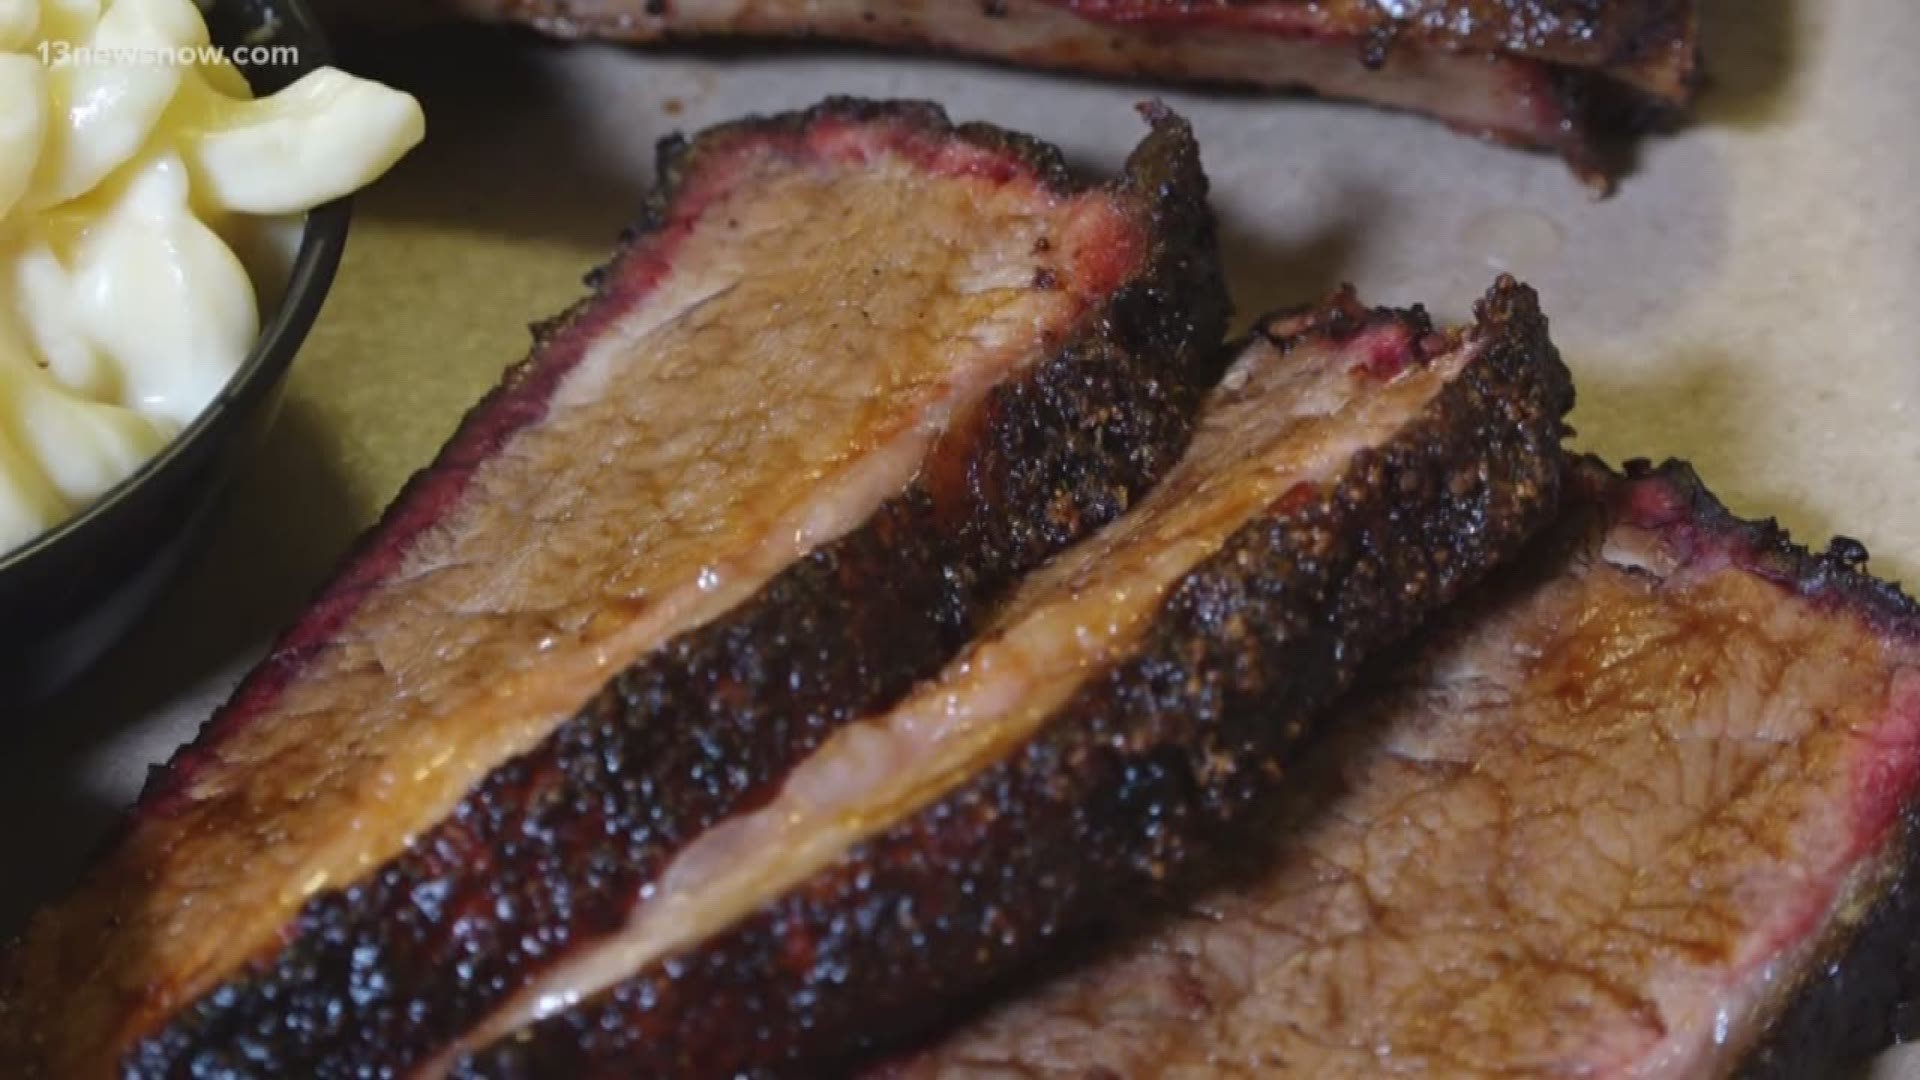 Scoot's BBQ in Gloucester was named the best barbecue in Virginia by Virginia Living magazine. The family-owned restaurant is located in Gloucester Point.